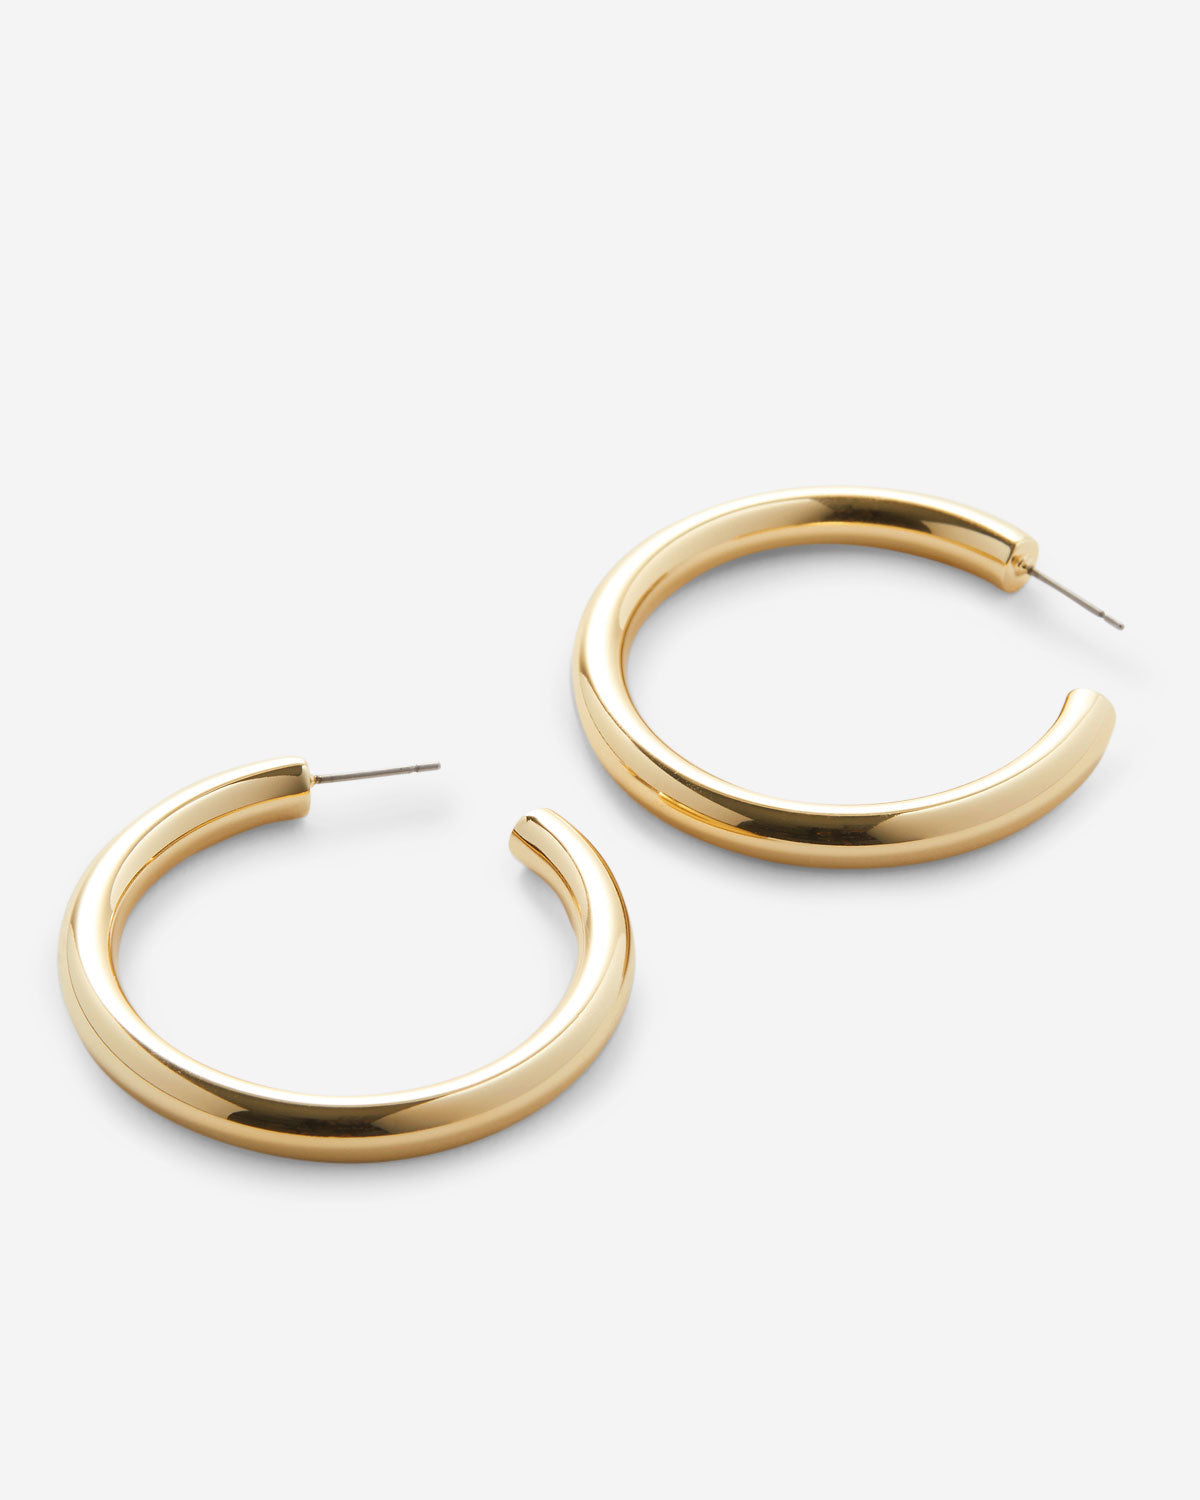 Layers of You, Unstoppable Maxi Hoop Earrings